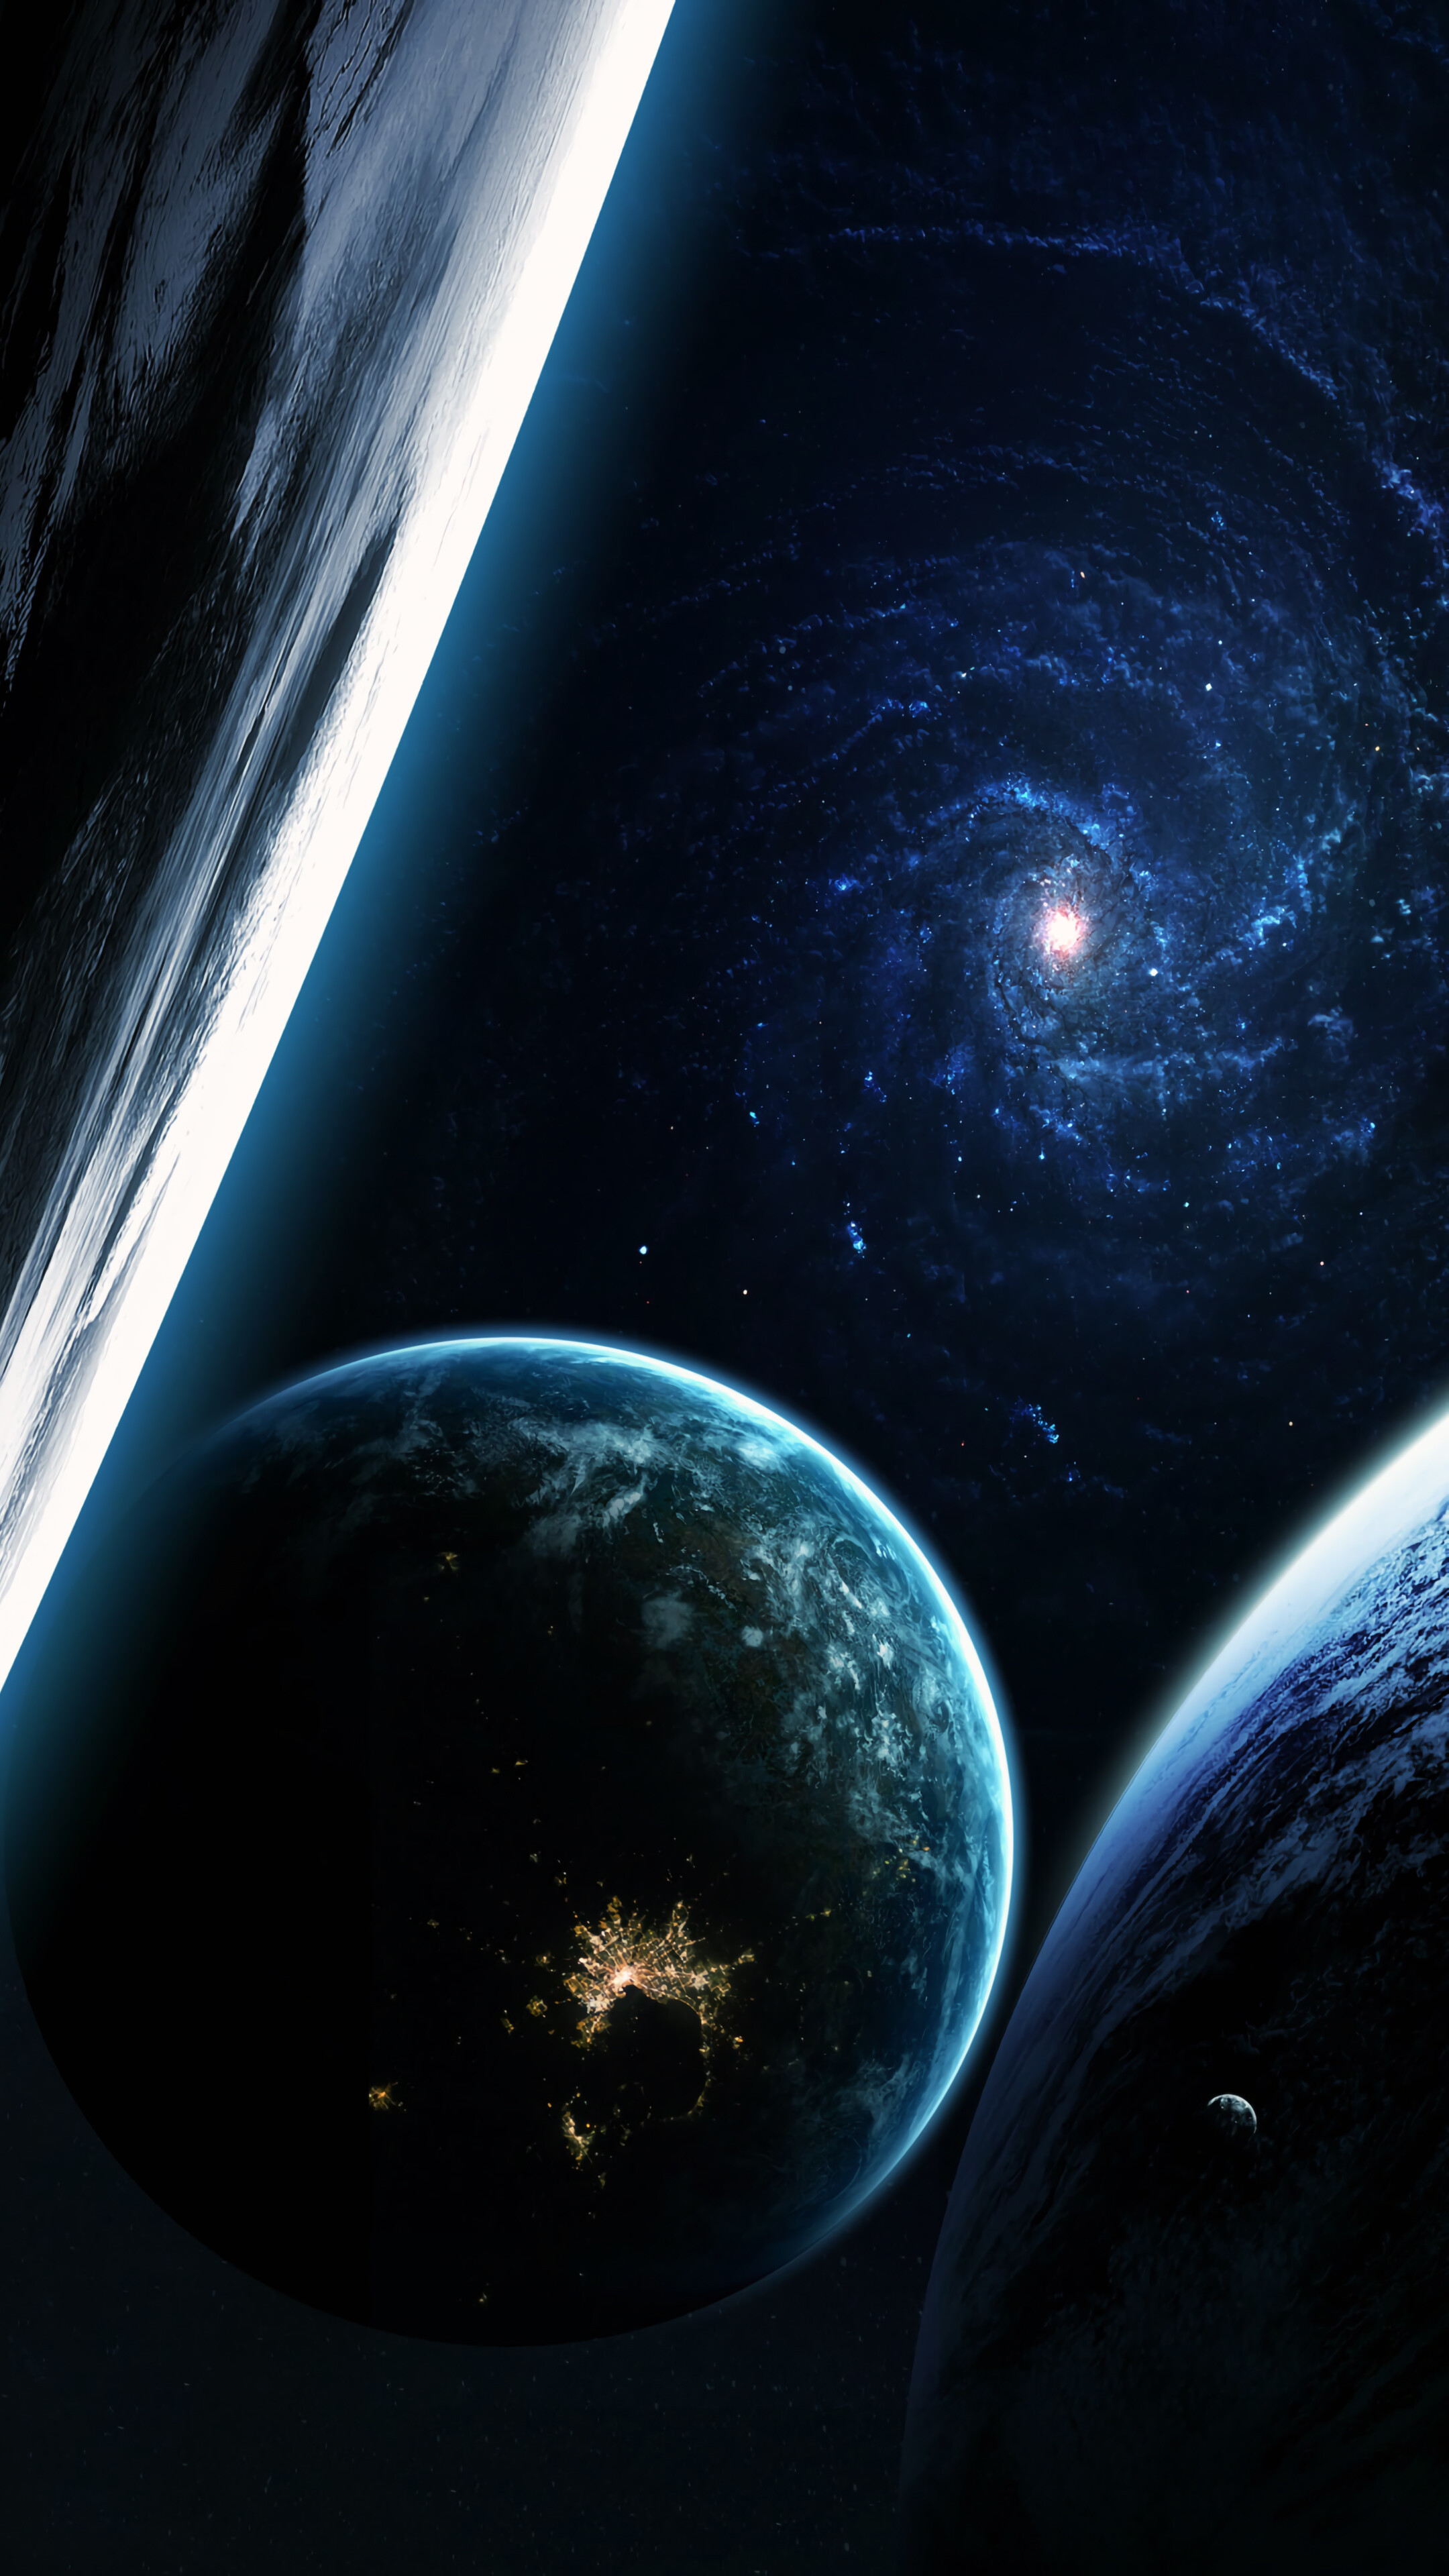 Space Planet Wallpaper (best Space Planet Wallpaper and image) on WallpaperChat